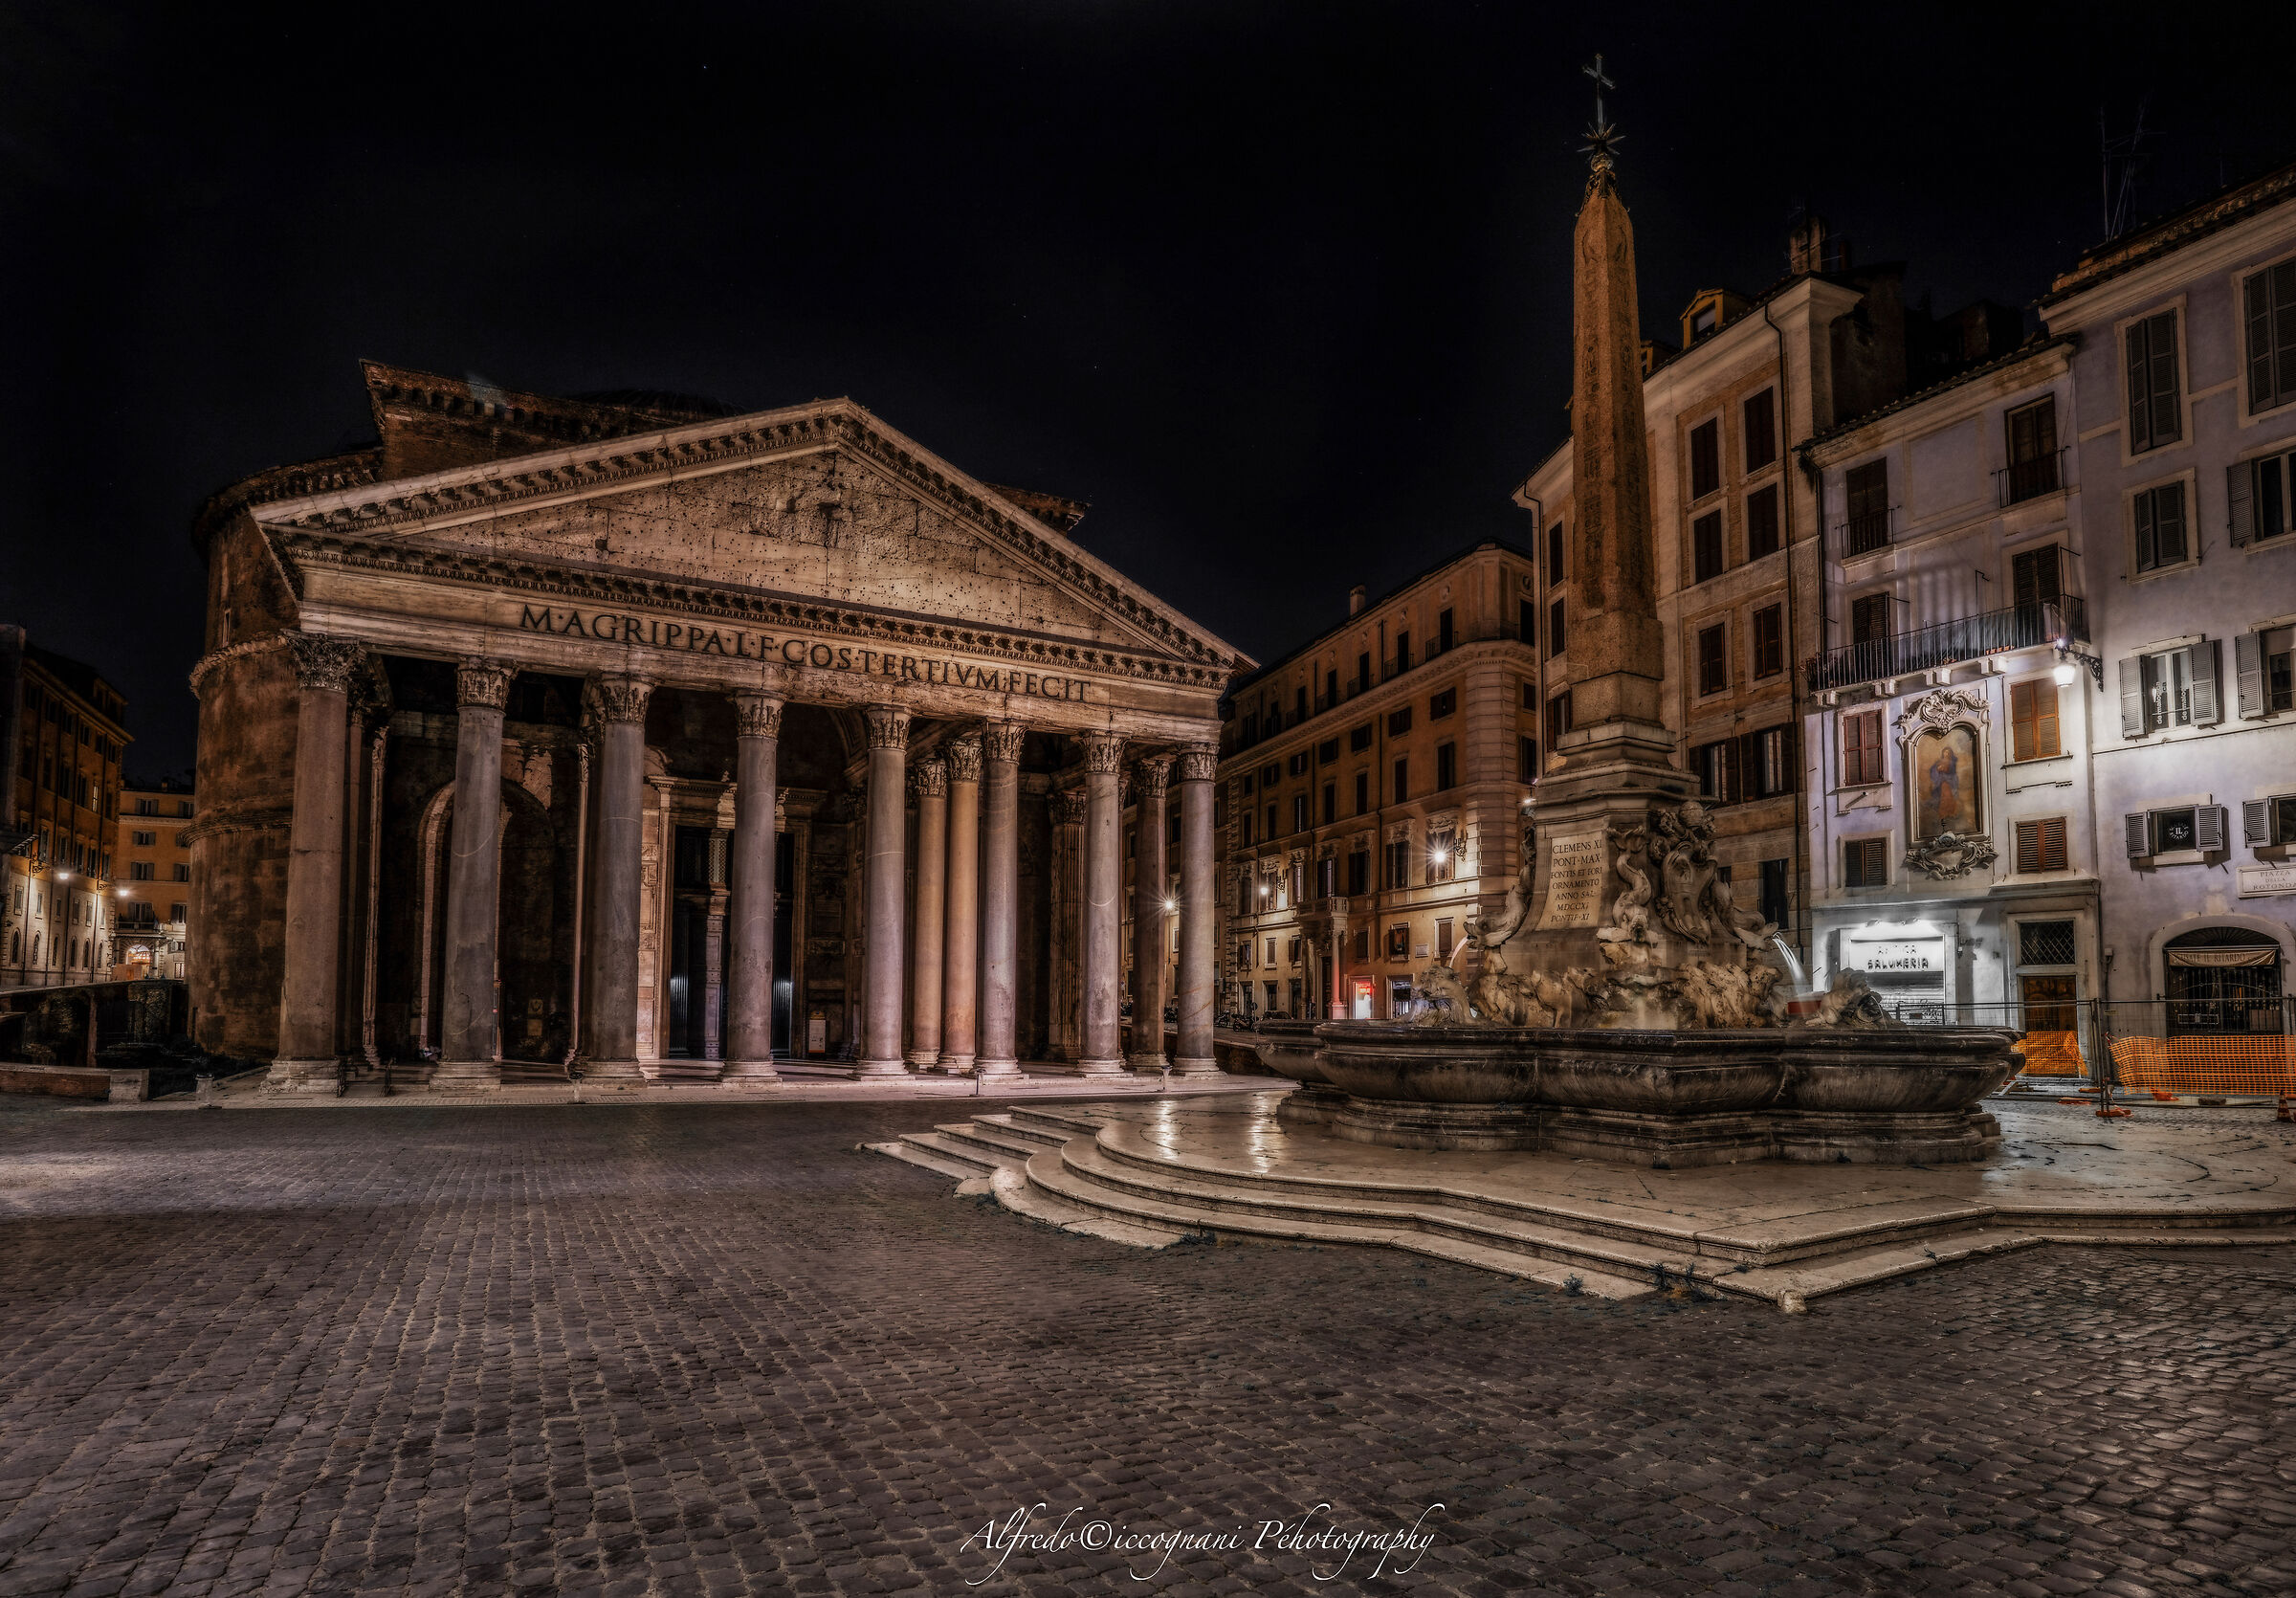 The silence of the Pantheon...